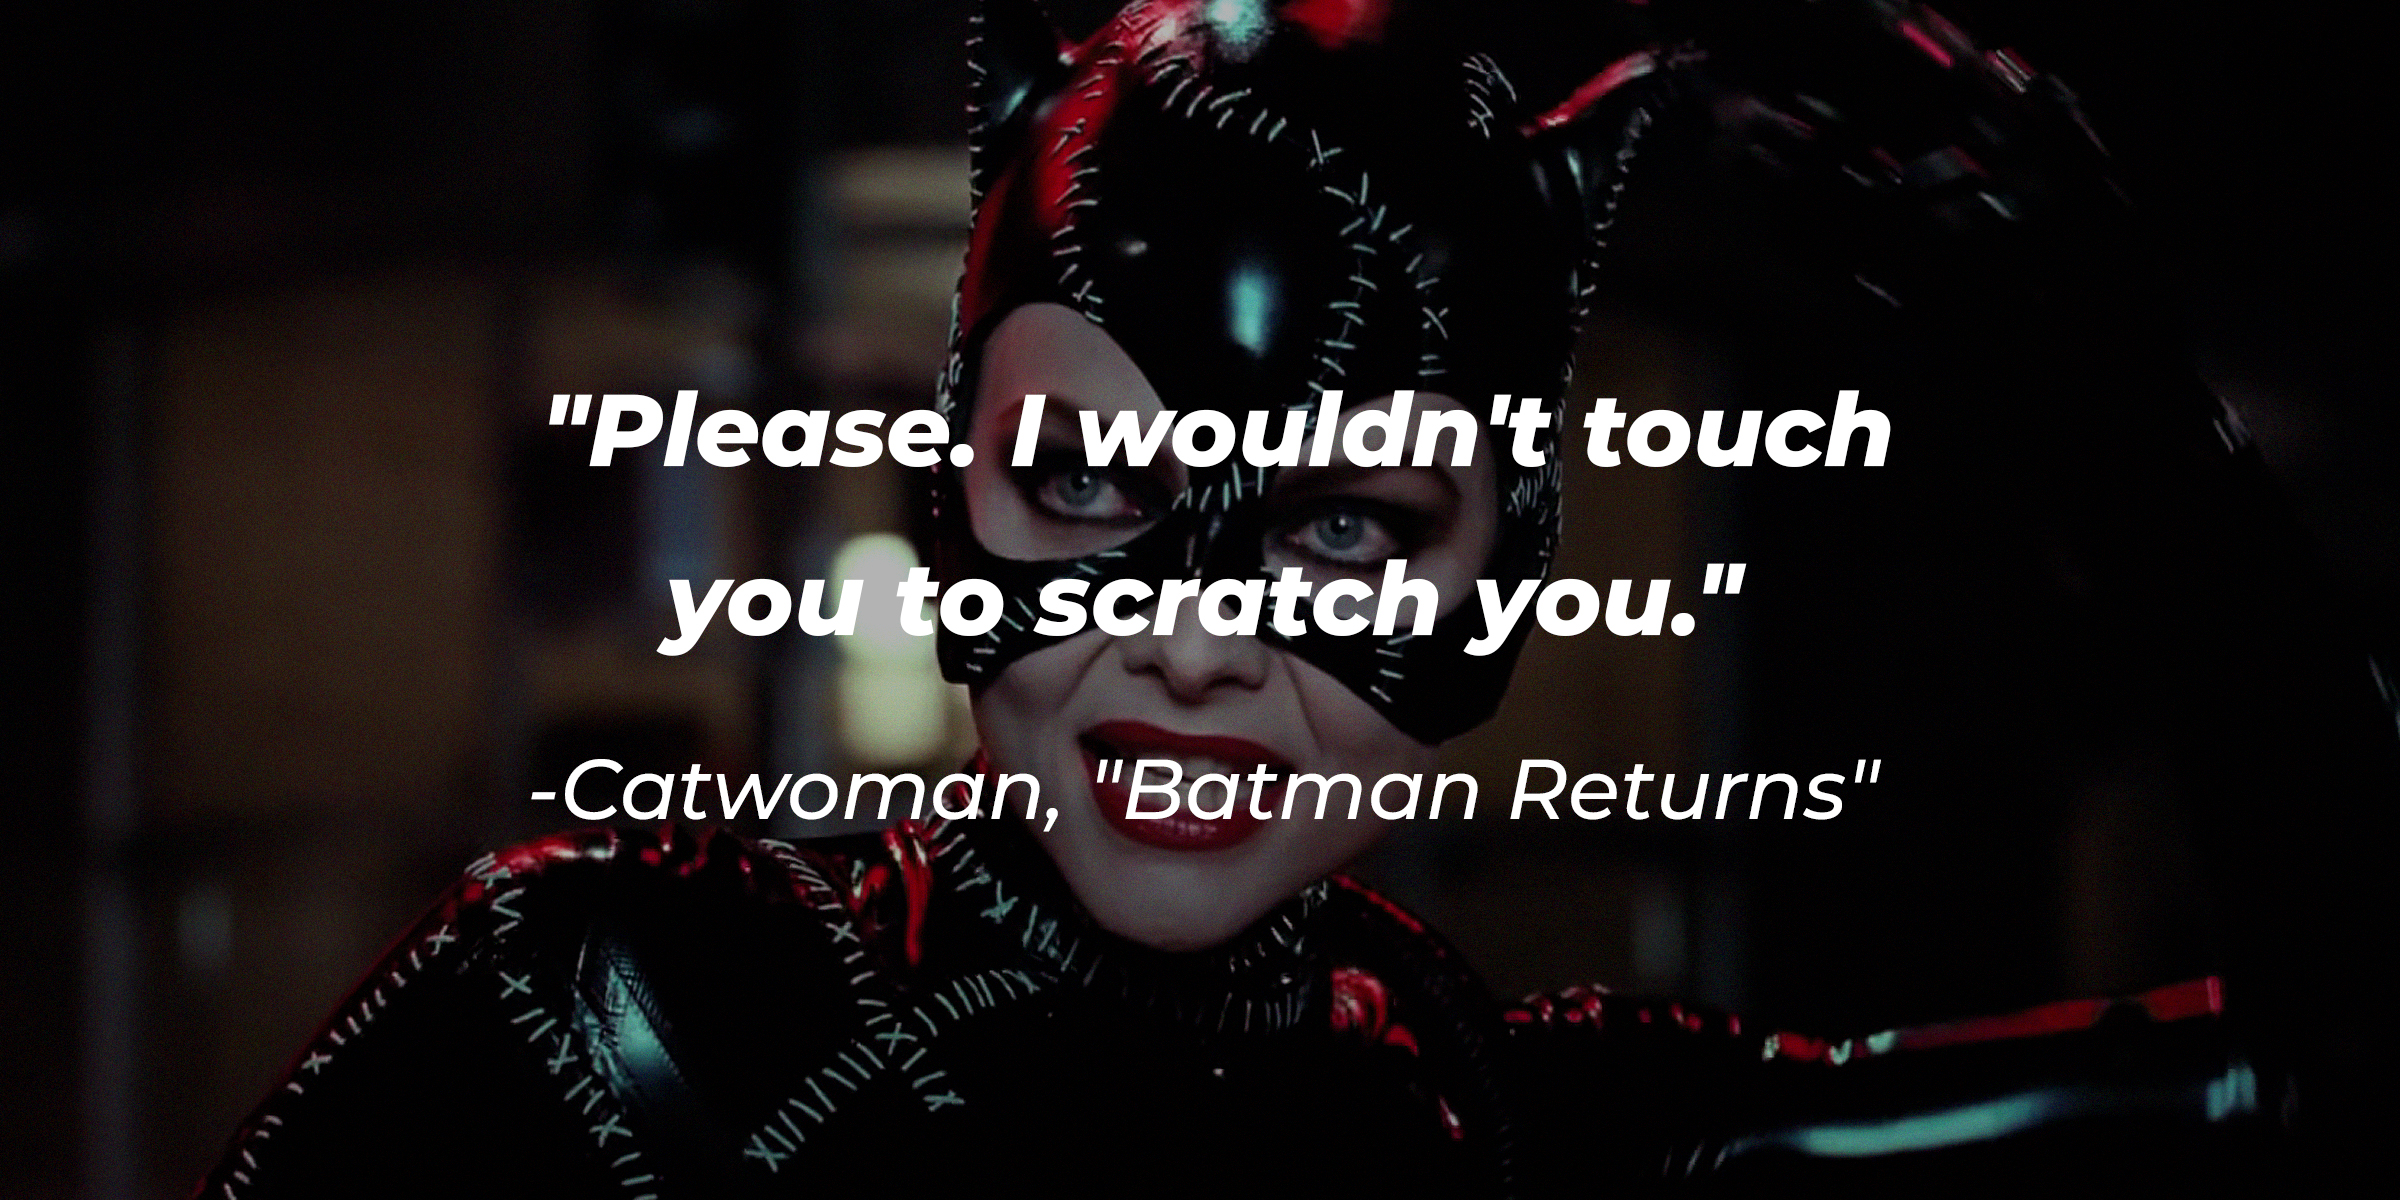 Catwoman’s quote: "Please. I wouldn't touch you to scratch you." | Source: youtube.com/warnerbrosentertainment